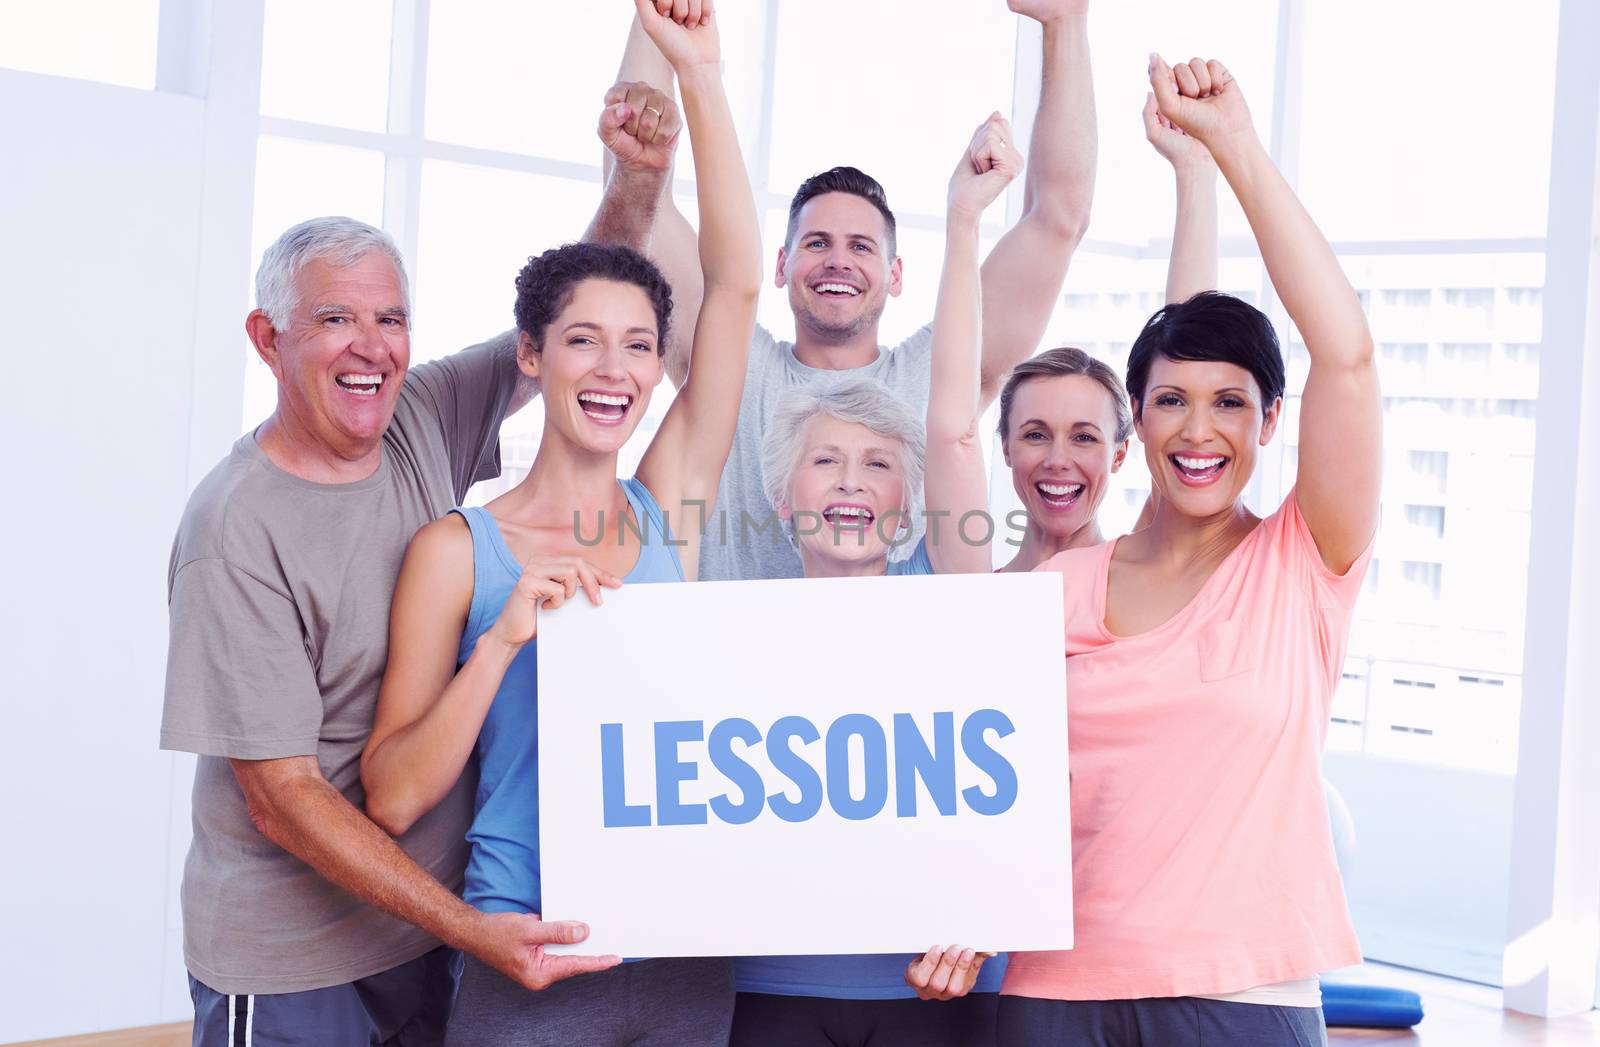 Lessons against portrait of happy fit people holding blank board by Wavebreakmedia